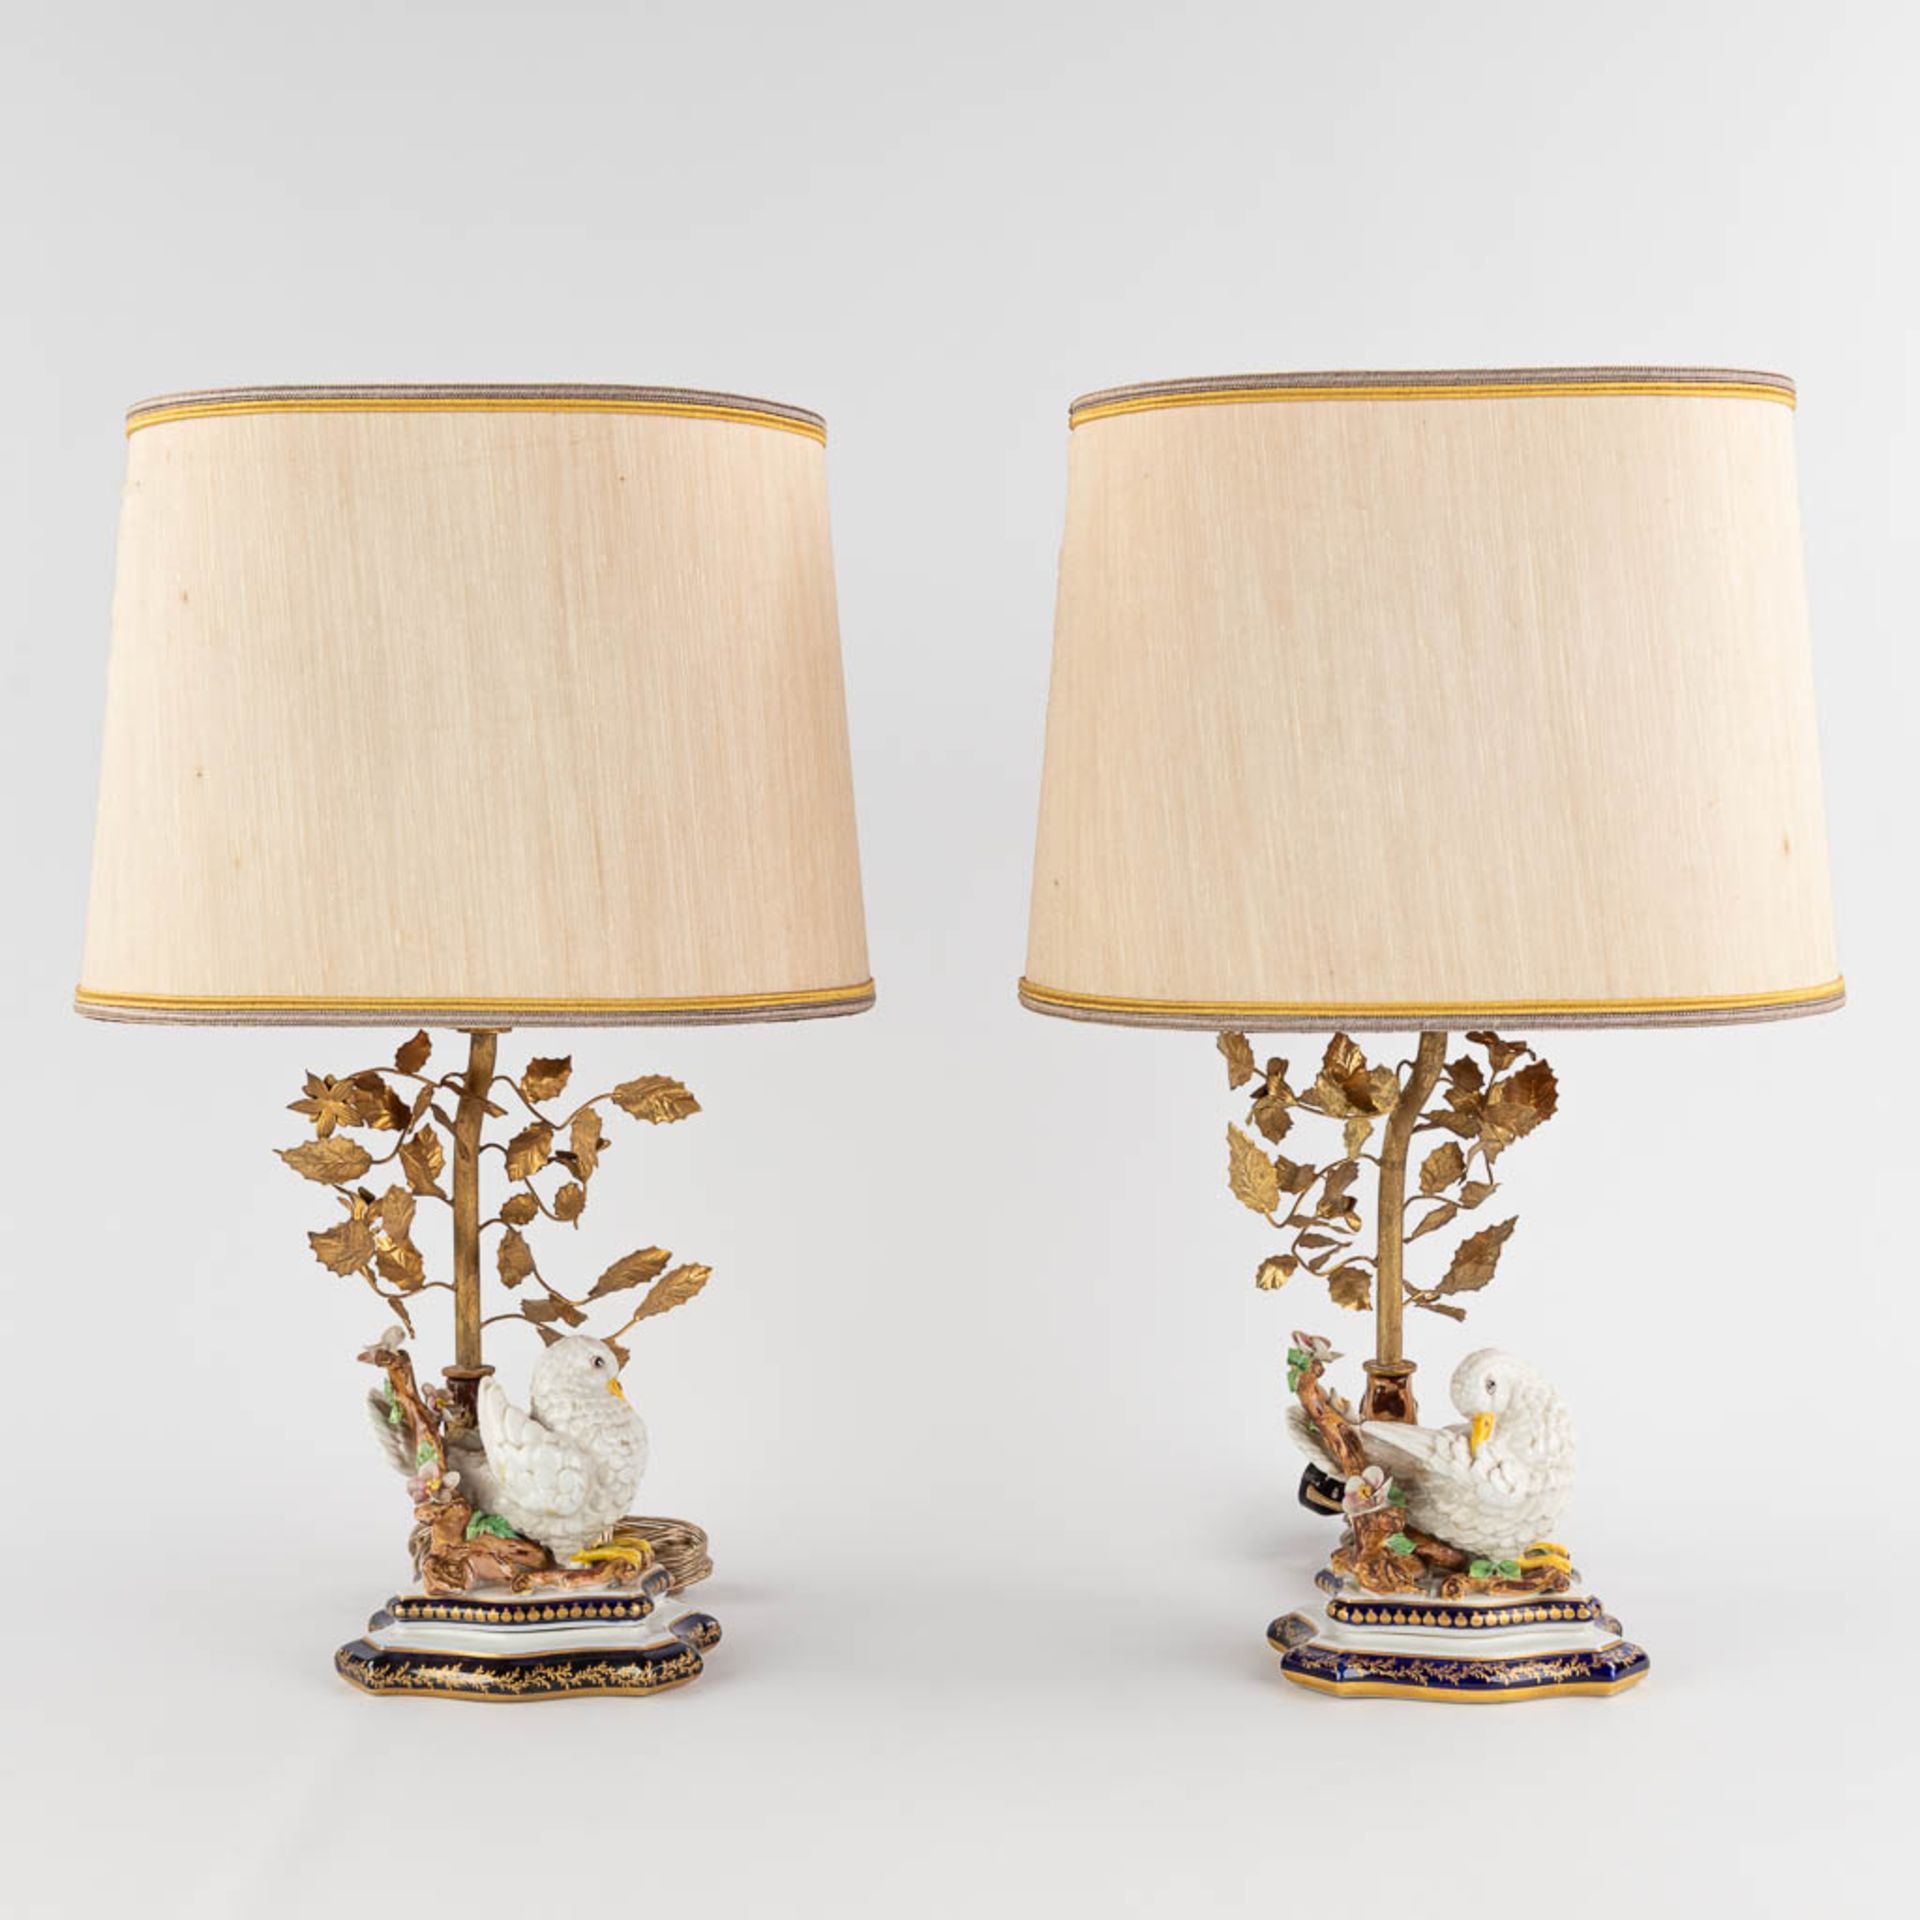 A pair of porcelain and metal table lamps decorated with birds, Sèvres marks. 20th C. (D:12 x W:15 x